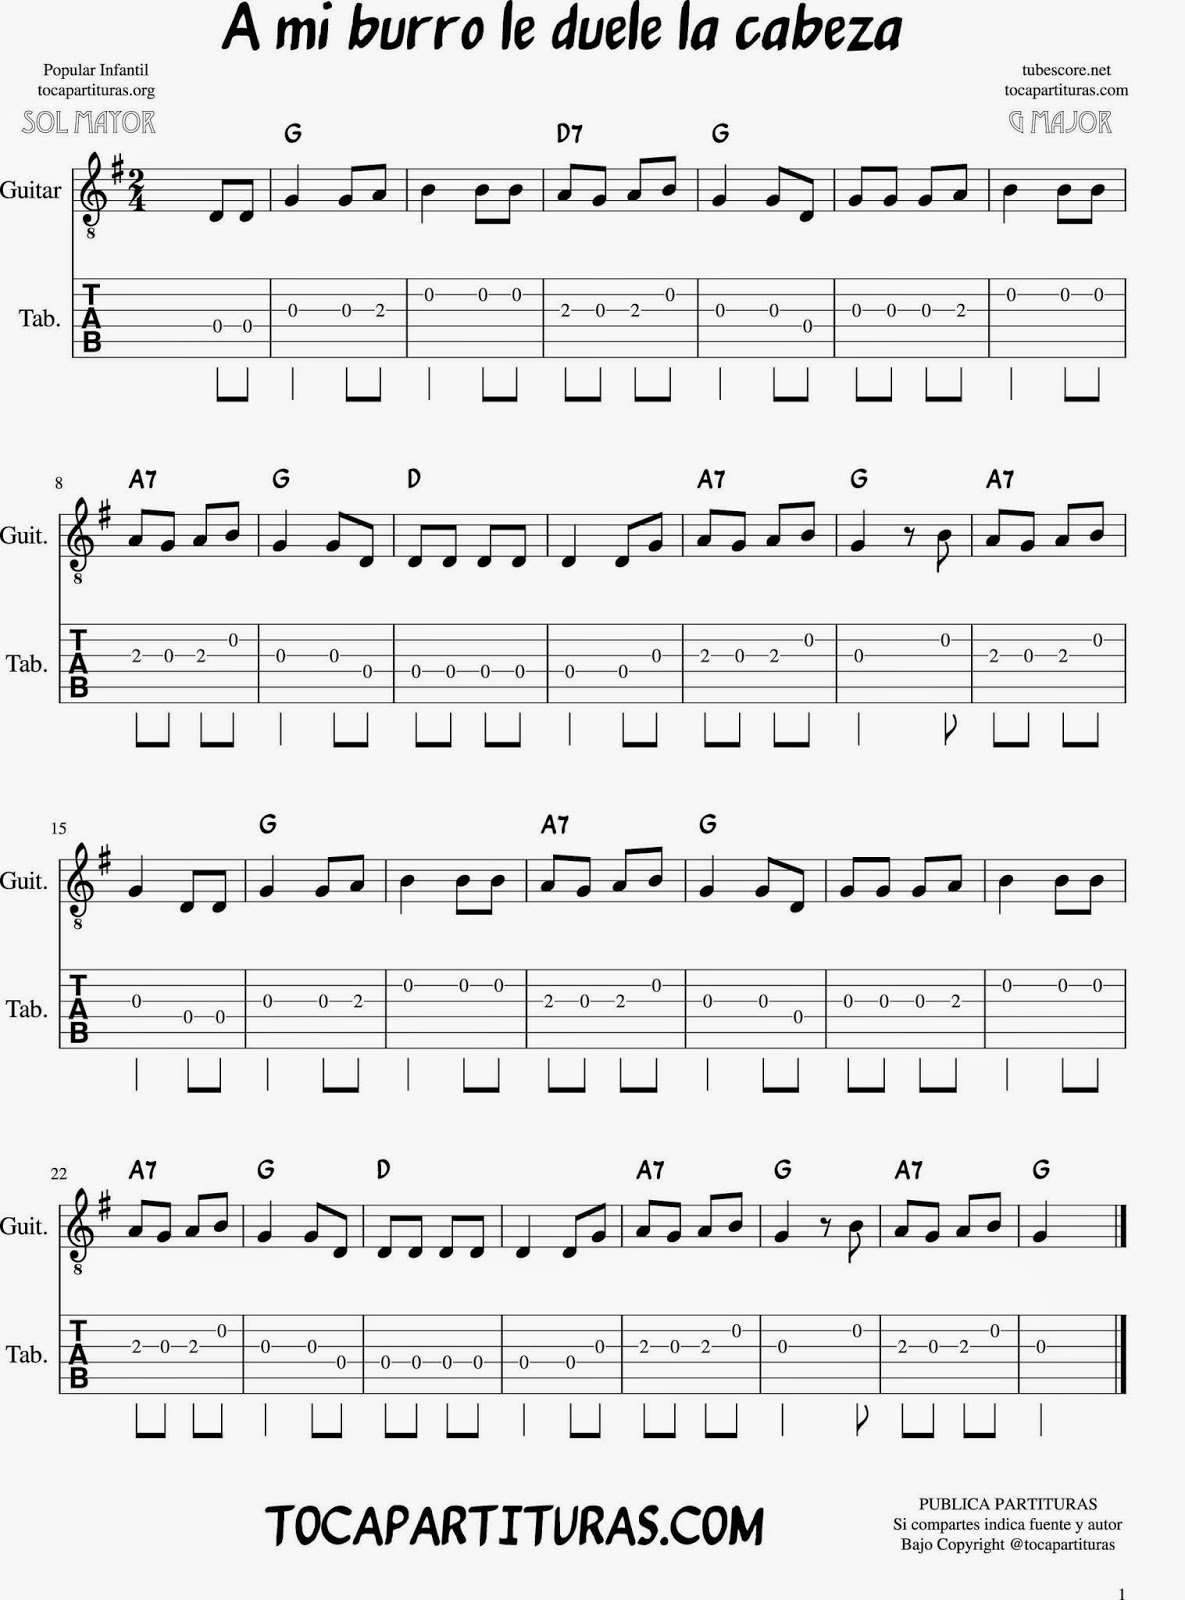 Tubescore My Donkey Tablature Sheet Music for Guitar in key G Major Popular Music Score for Kids Tab with Chords